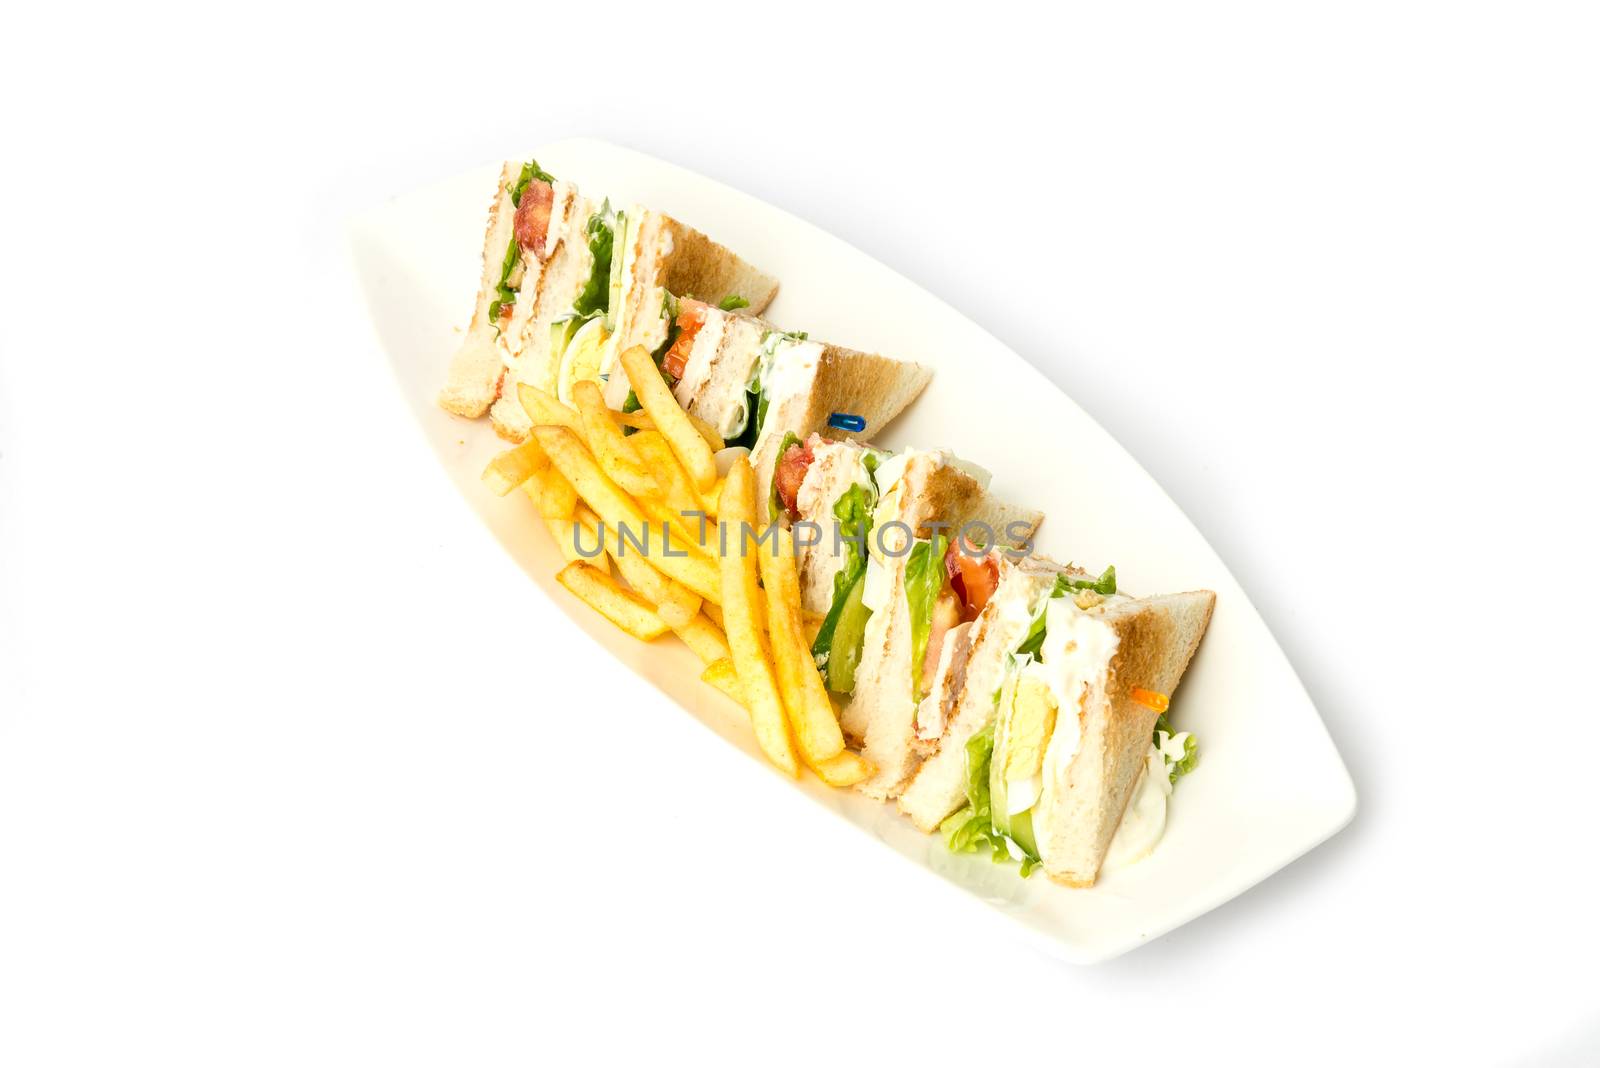 Club Sandwich with Cheese, Pickled Cucumber, Tomato and Smoked Meat. Garnished with French Fries by krknvkz